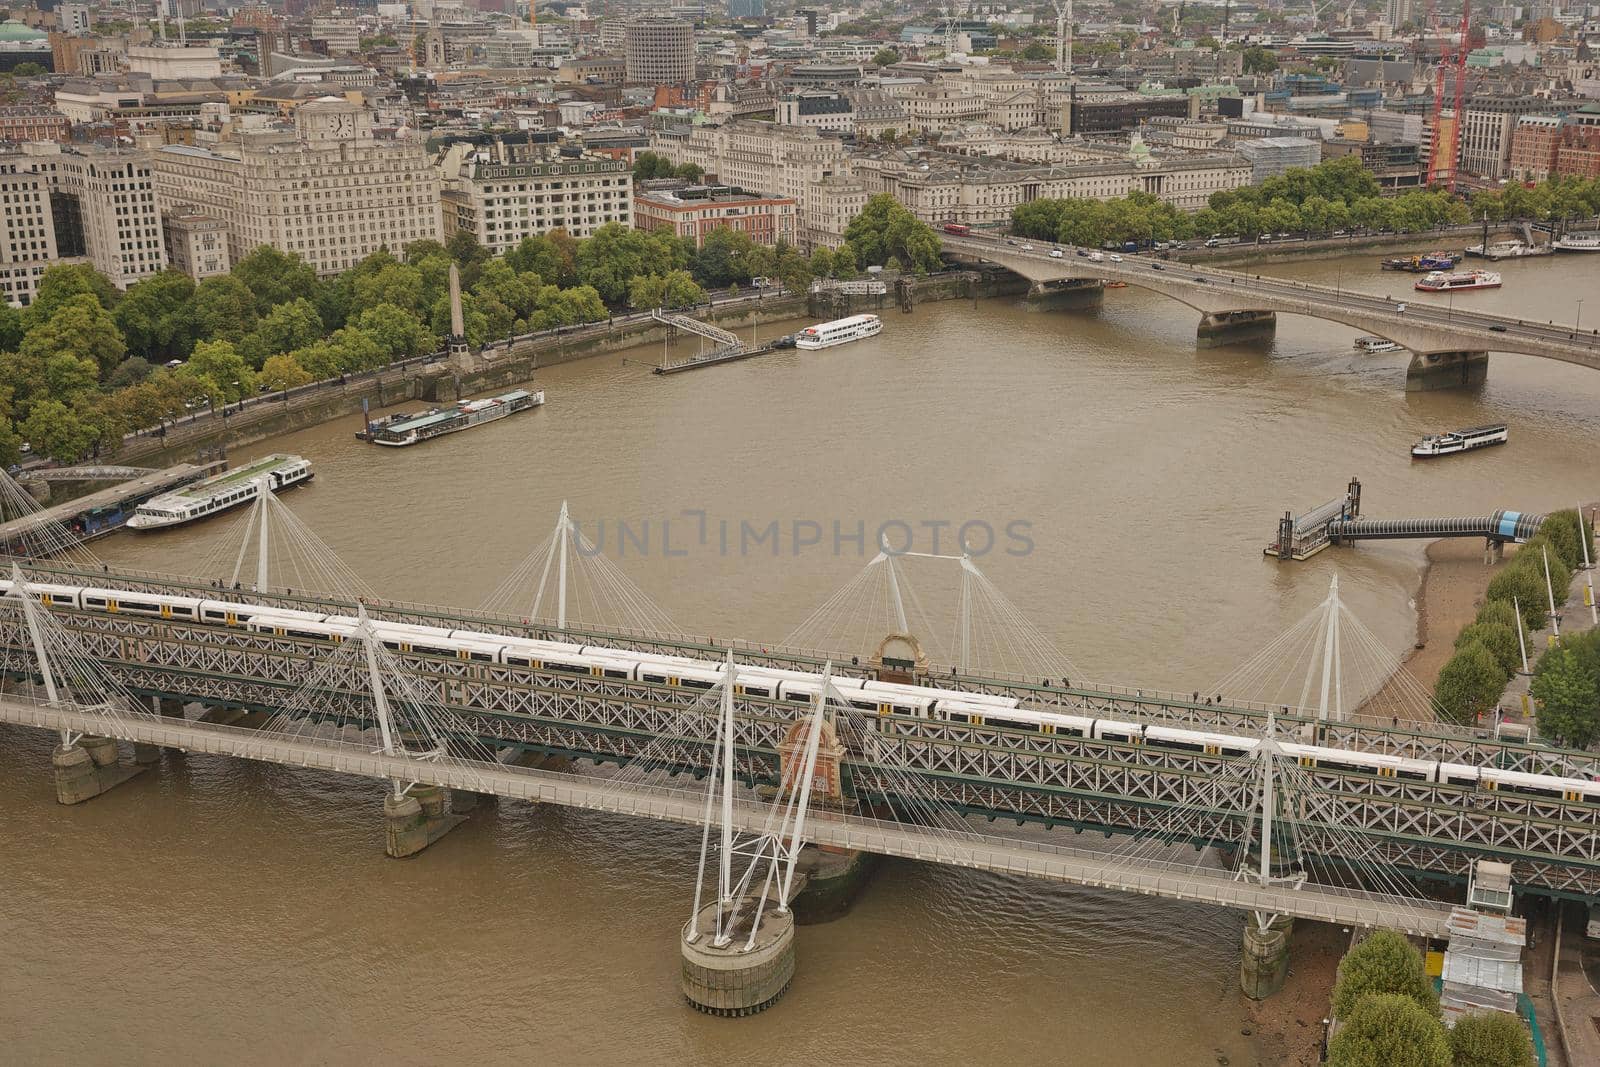 The view of the city from the London Eye ferris wheel on the South Bank of River Thames aka Millennium Wheel. by wondry